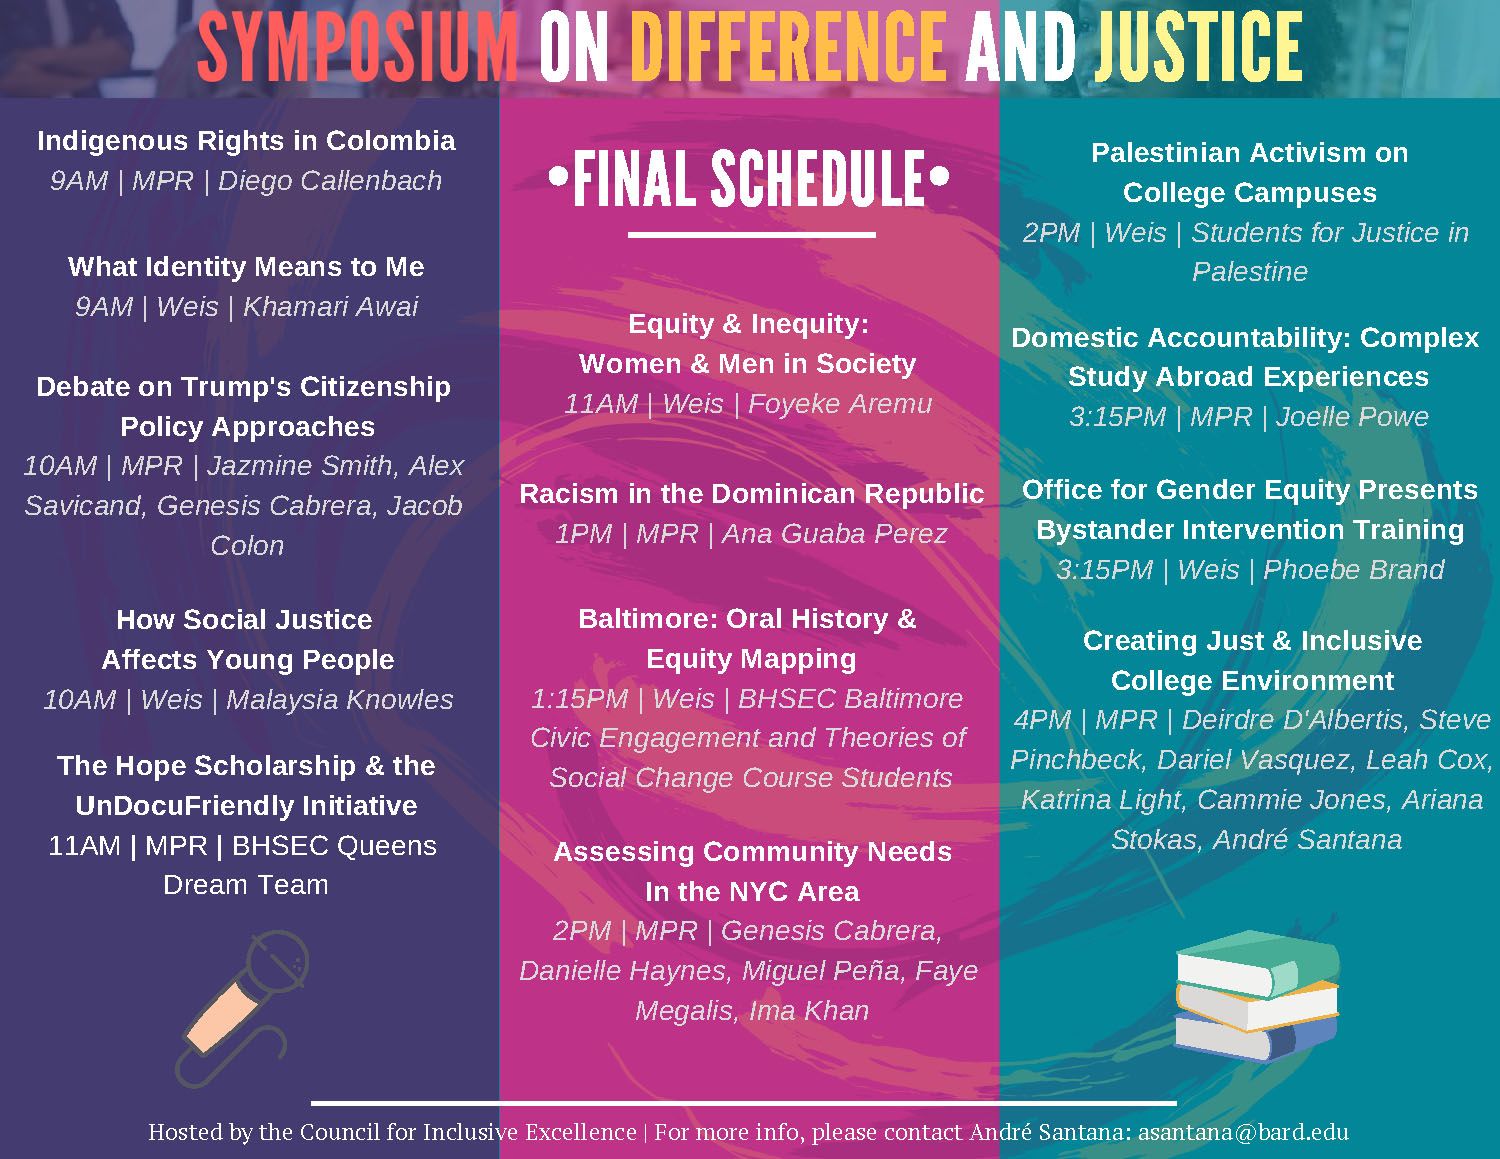 Symposium on Difference and Justice